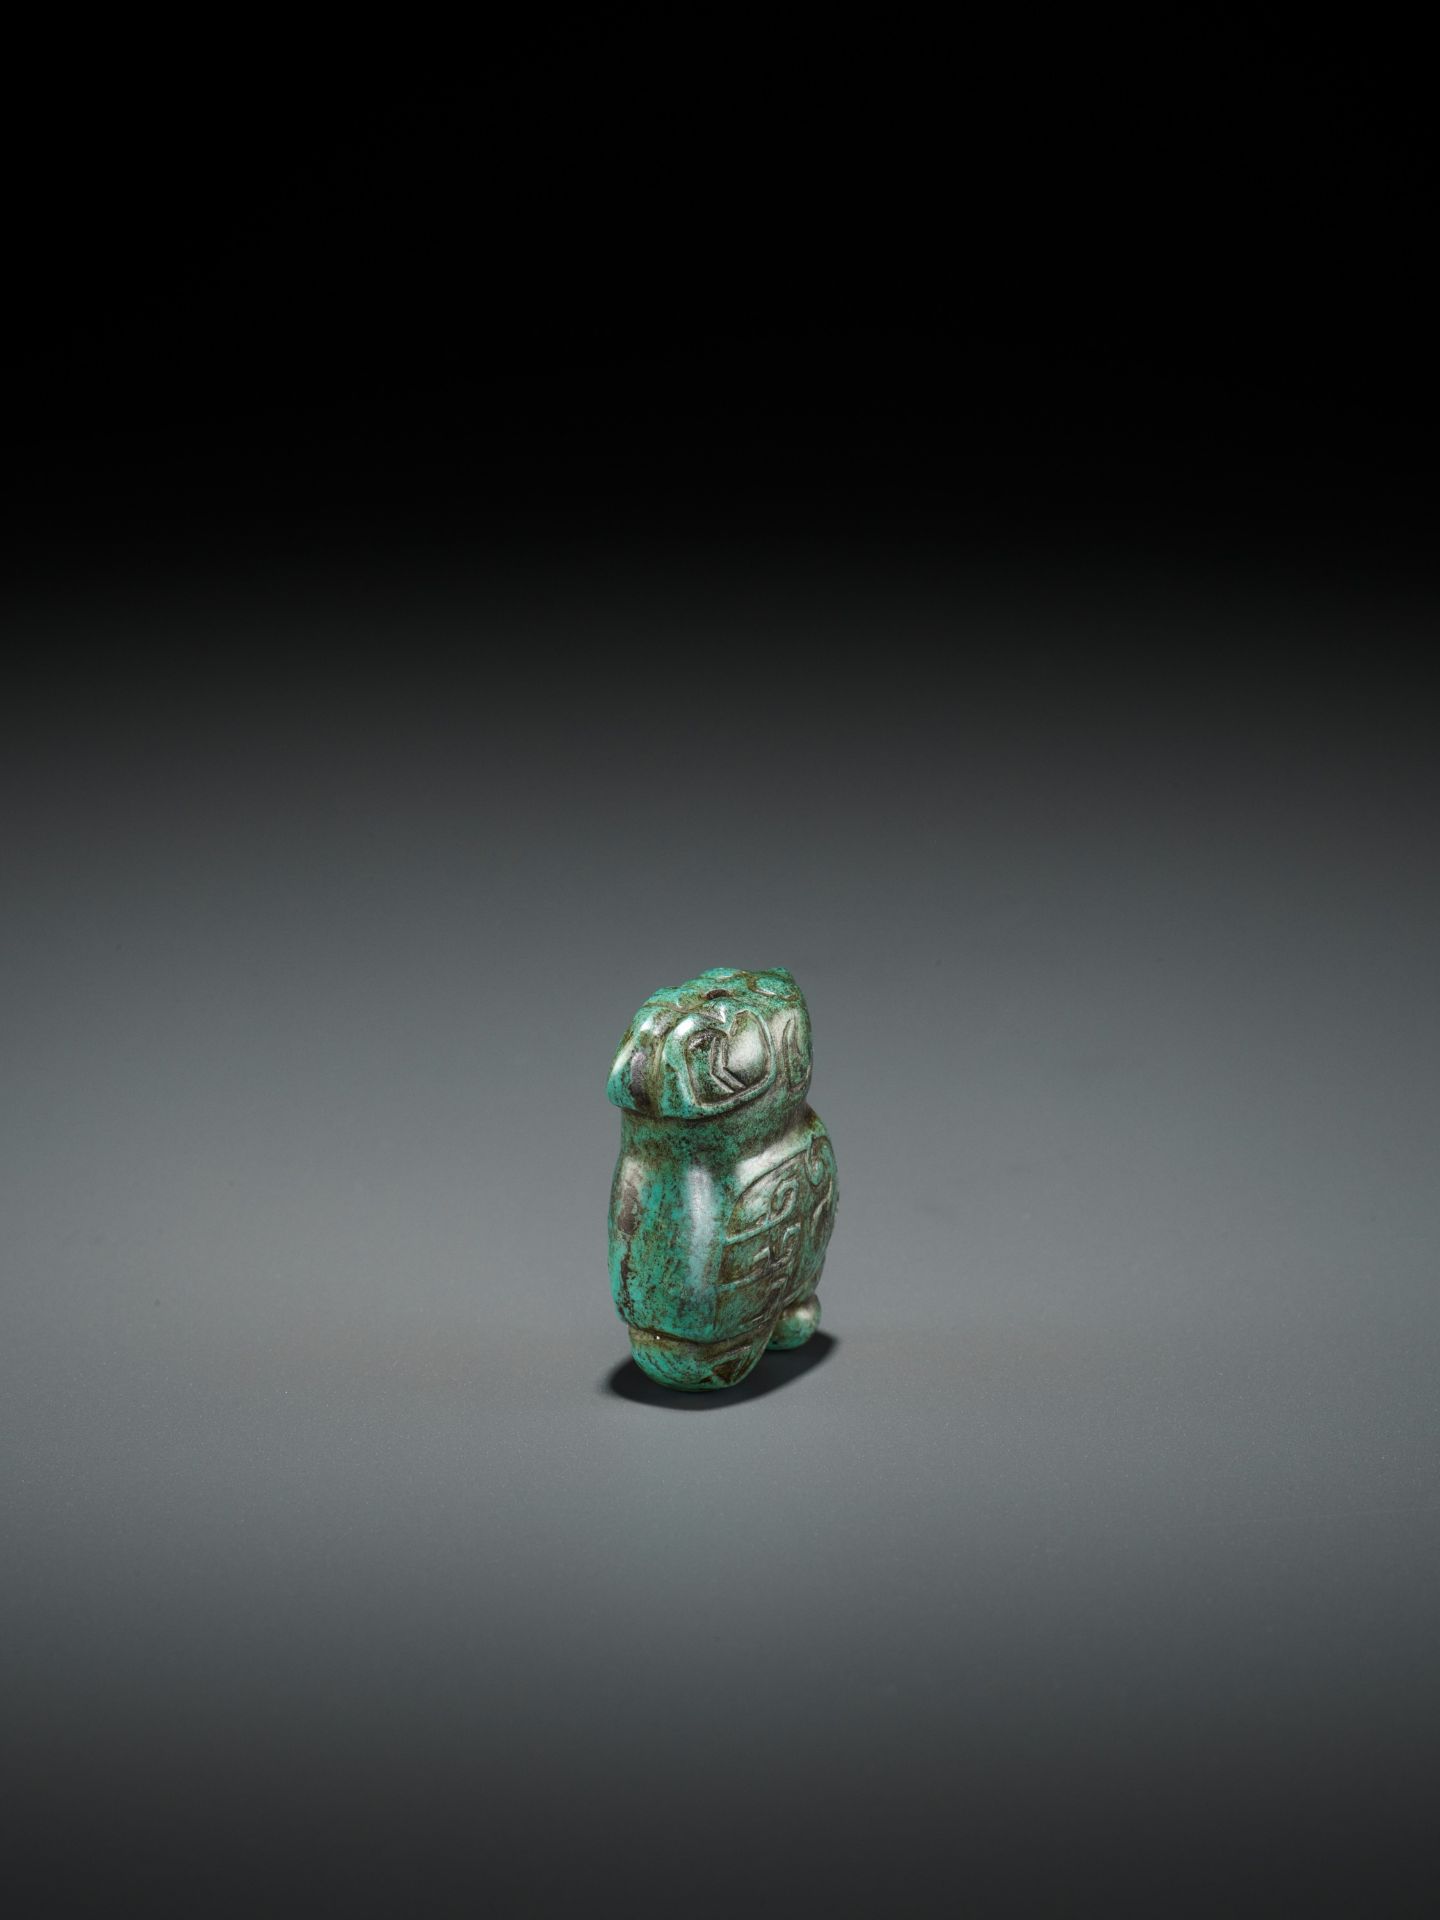 A TURQUOISE MATRIX PENDANT DEPICTING AN OWL, LATE SHANG DYNASTY - Image 5 of 13